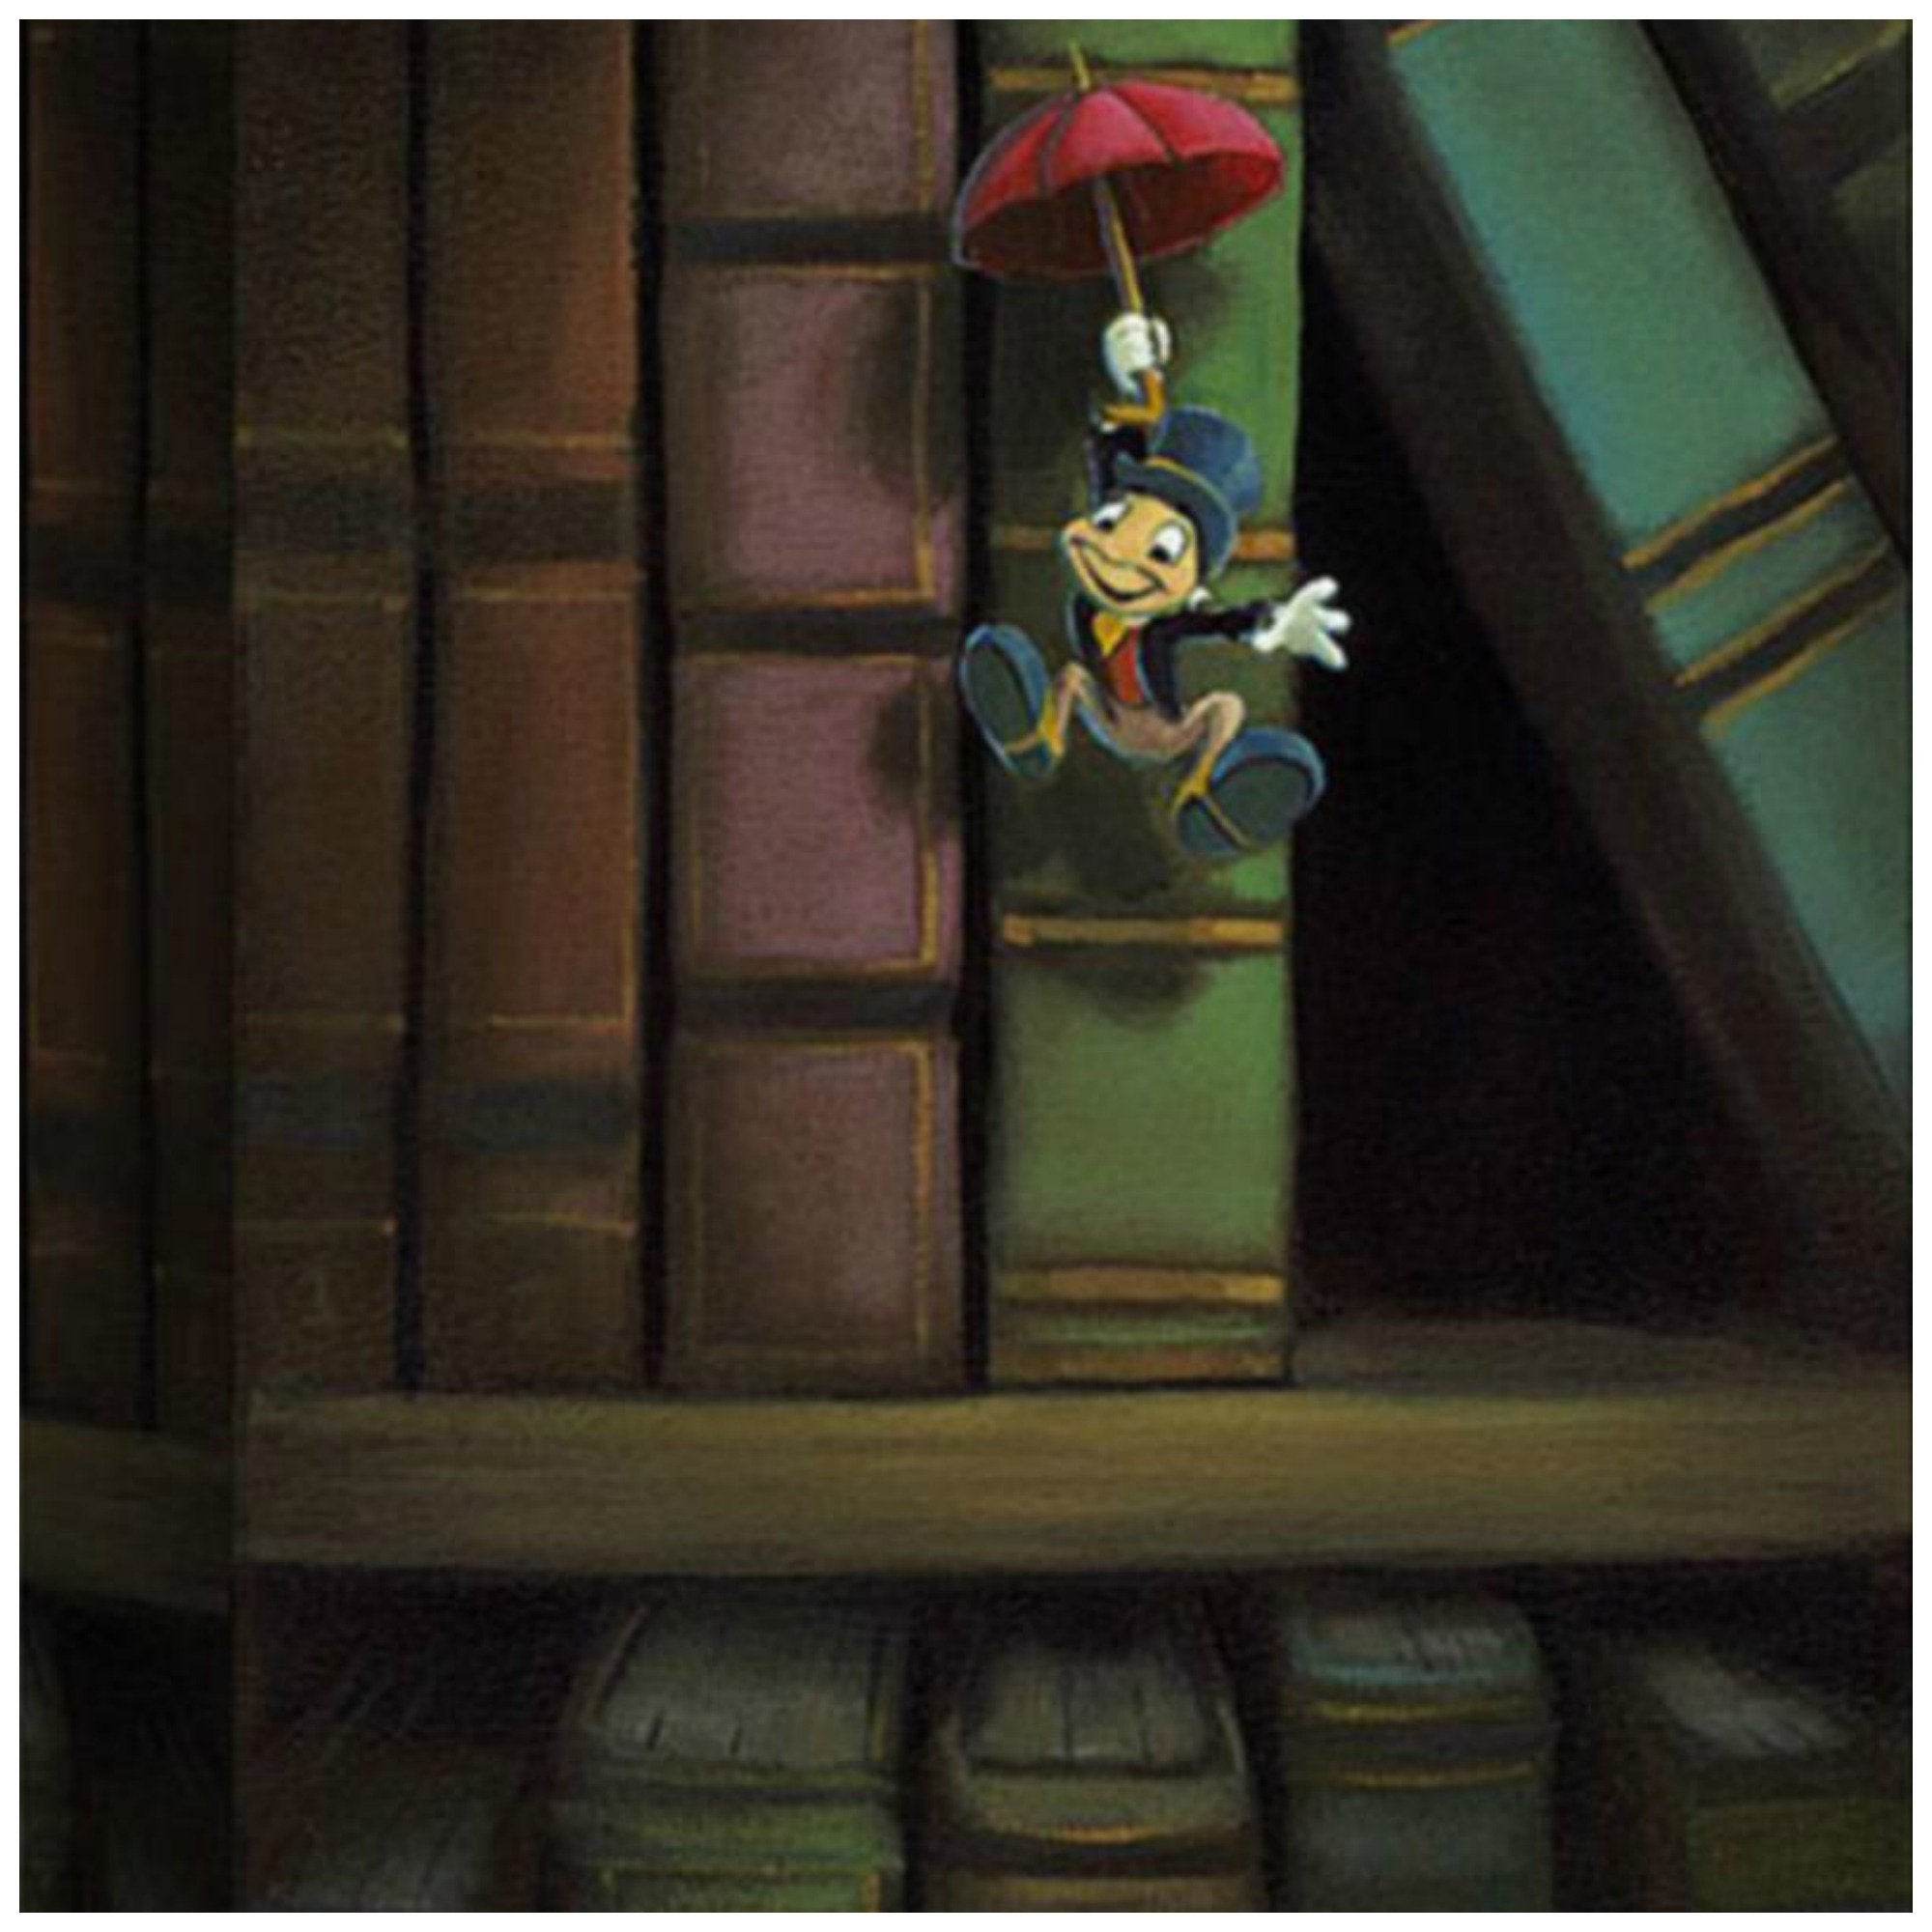 Dropping In by Rob Kaz.  Jiminy Cricket gliding down holding his red umbrella directly above Cleo's fish bowl - closeup